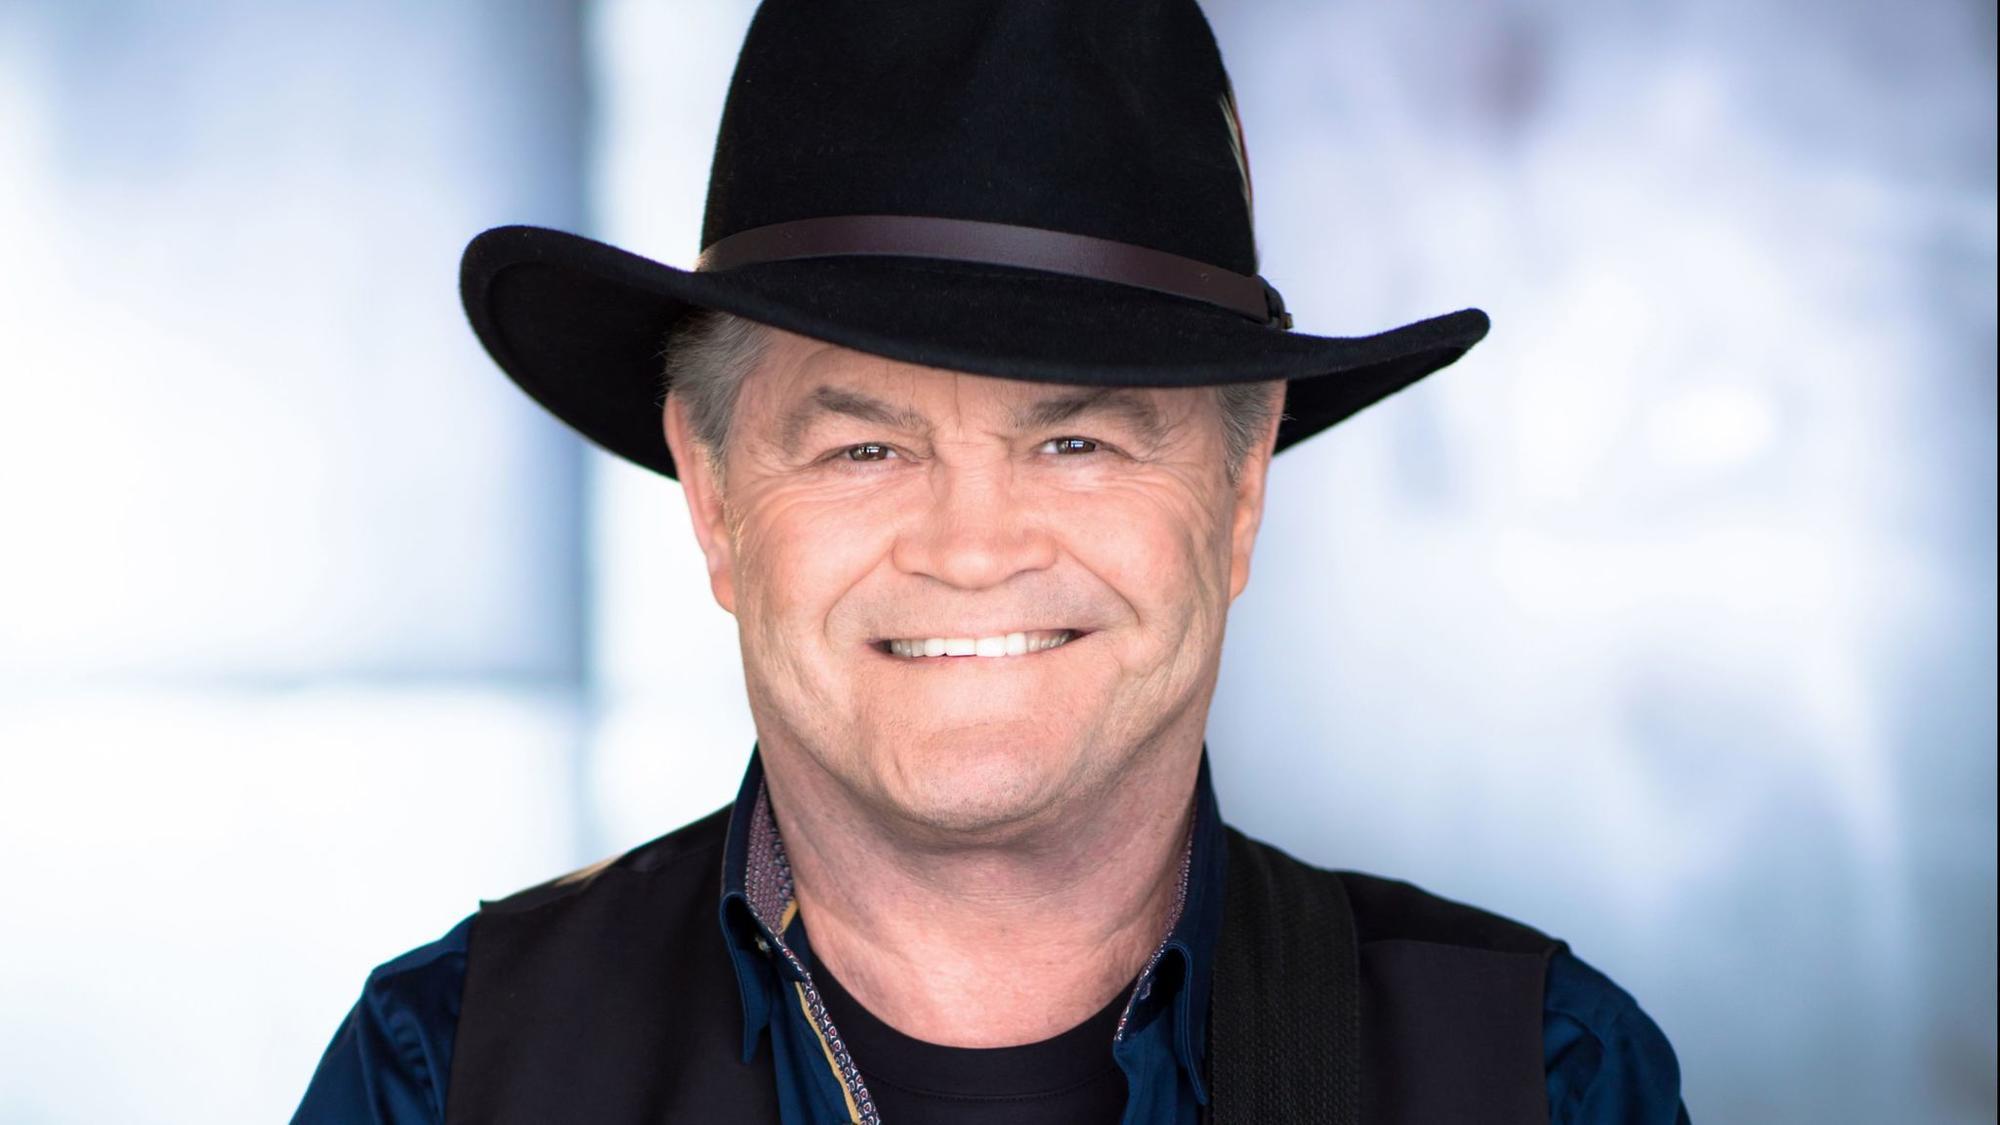 A Big BOSS Happy Birthday today to Micky Dolenz from all of us at The Boss 